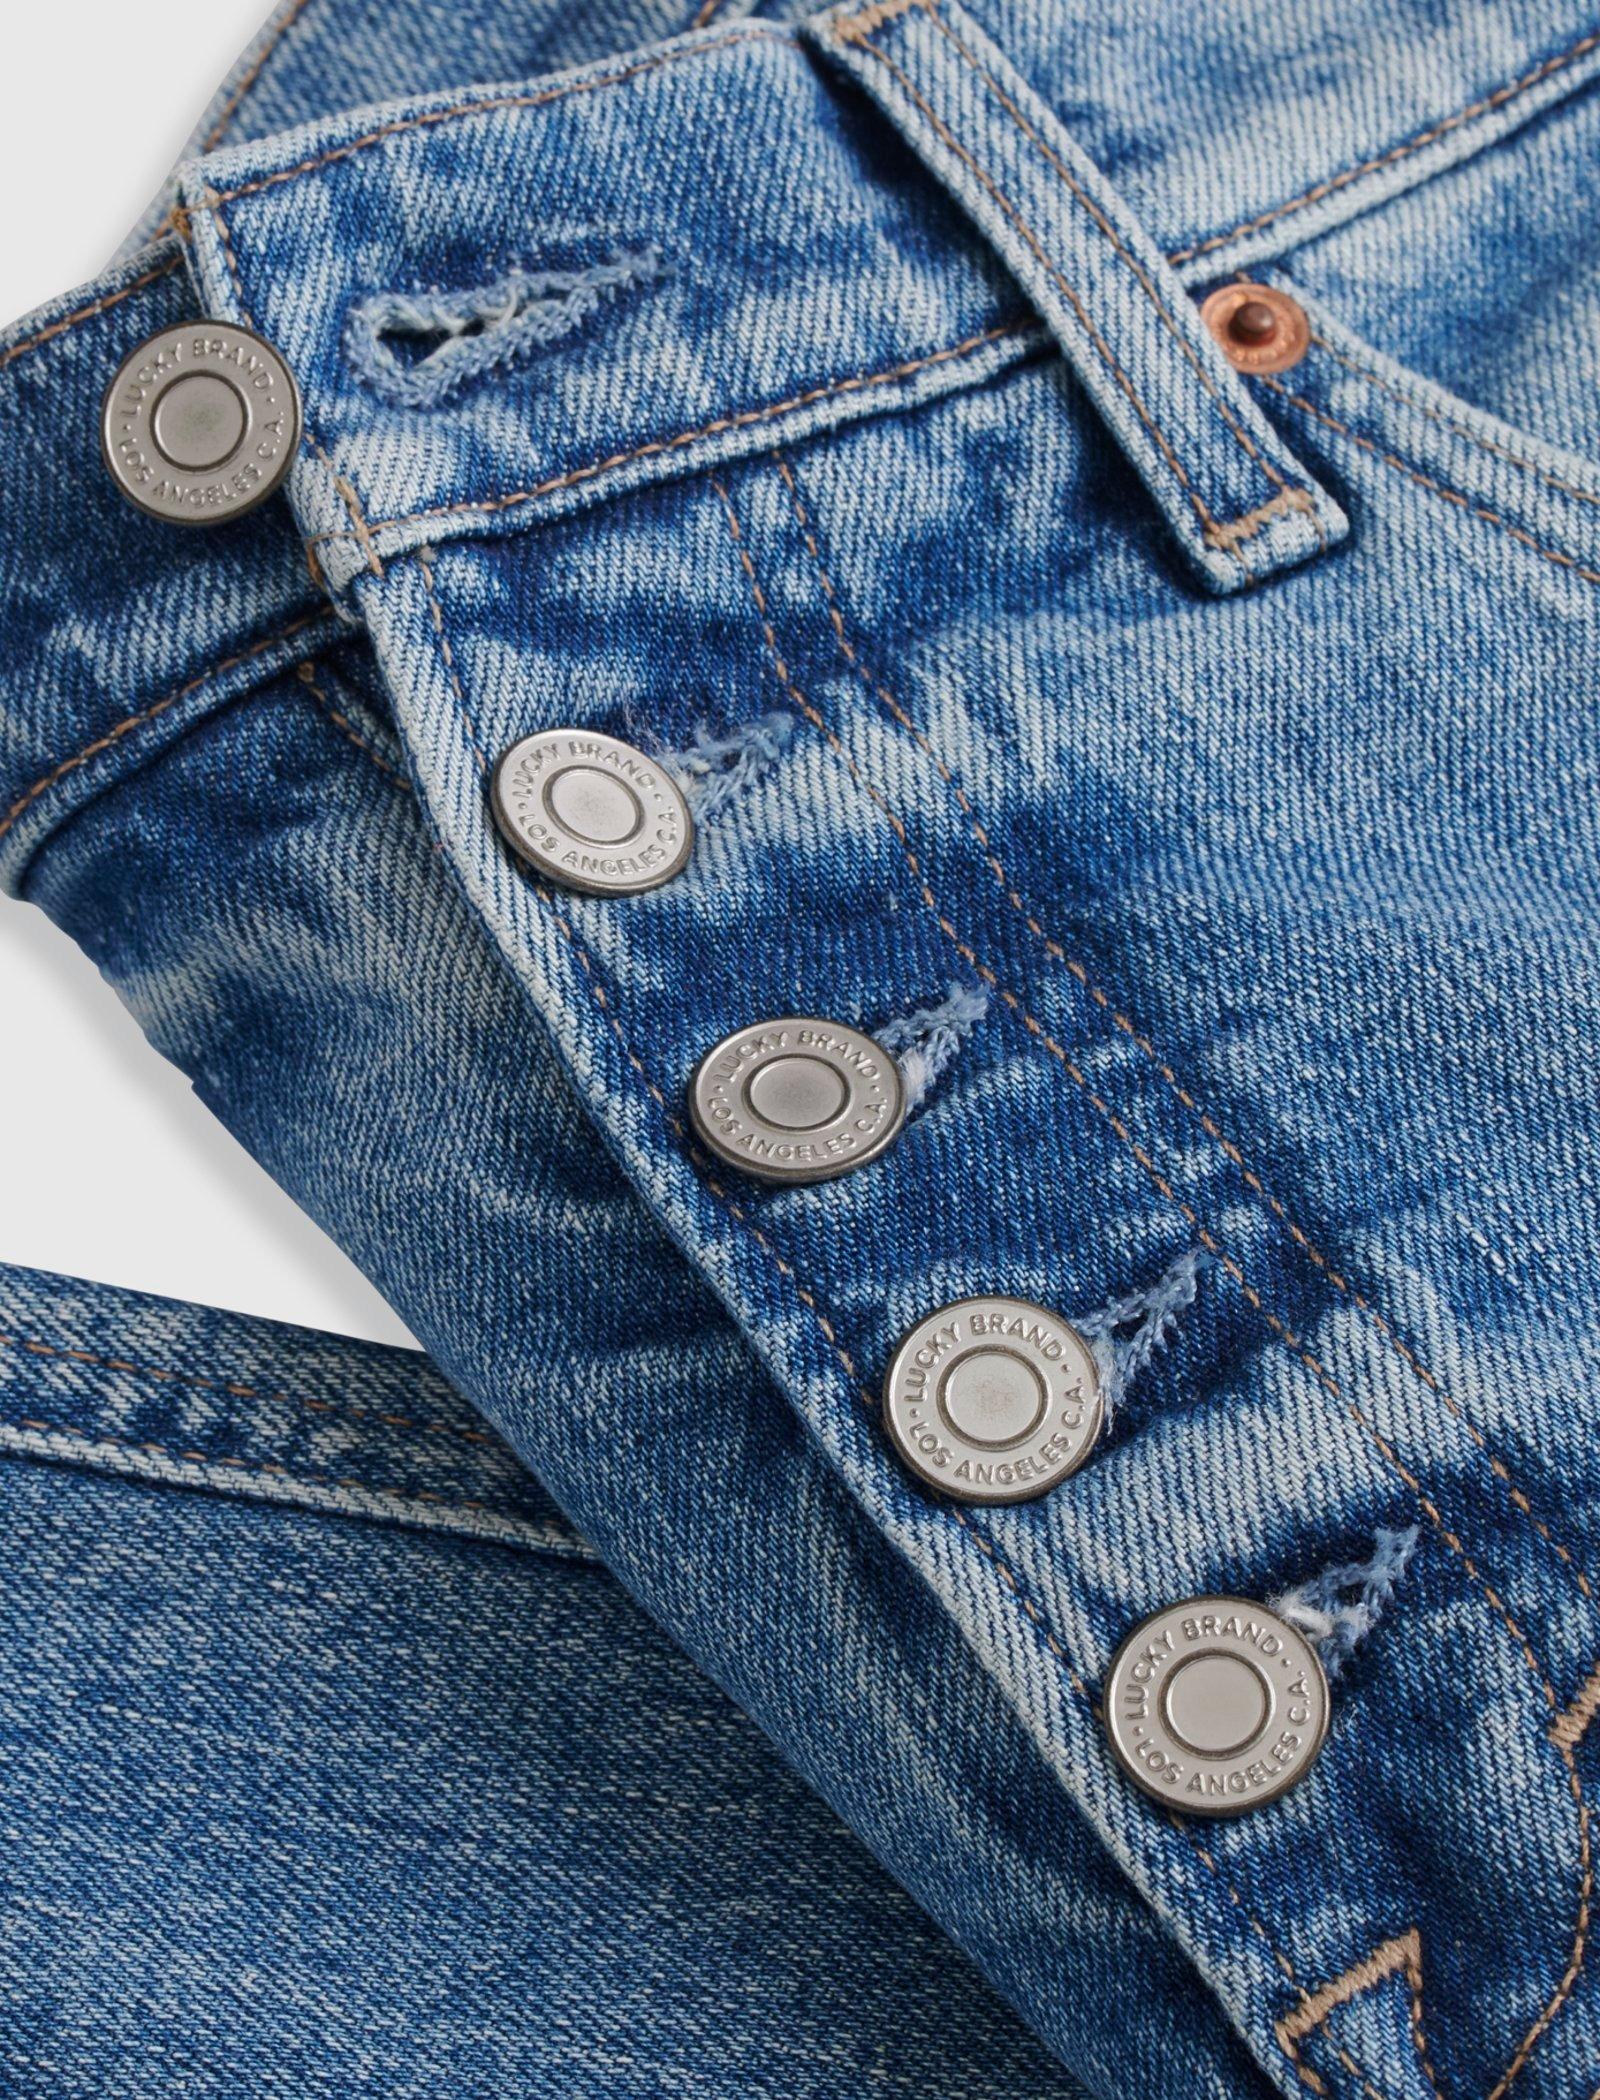 lucky brand jeans button replacement